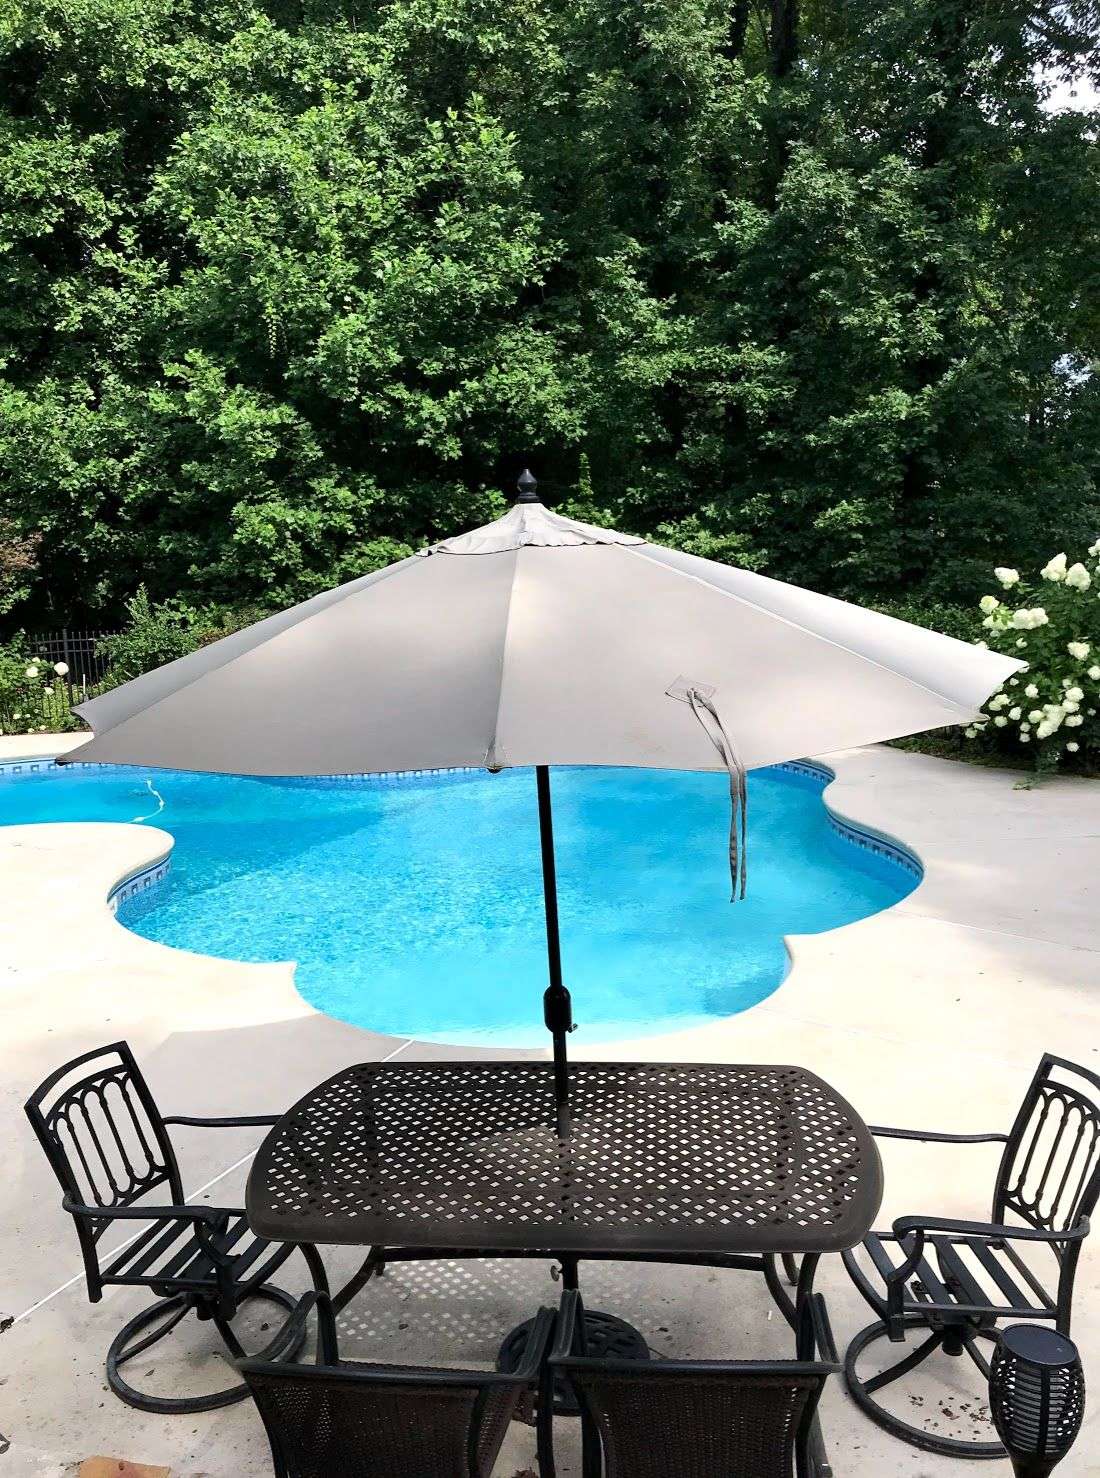 What Size and Shape Patio Umbrella Should I Get?